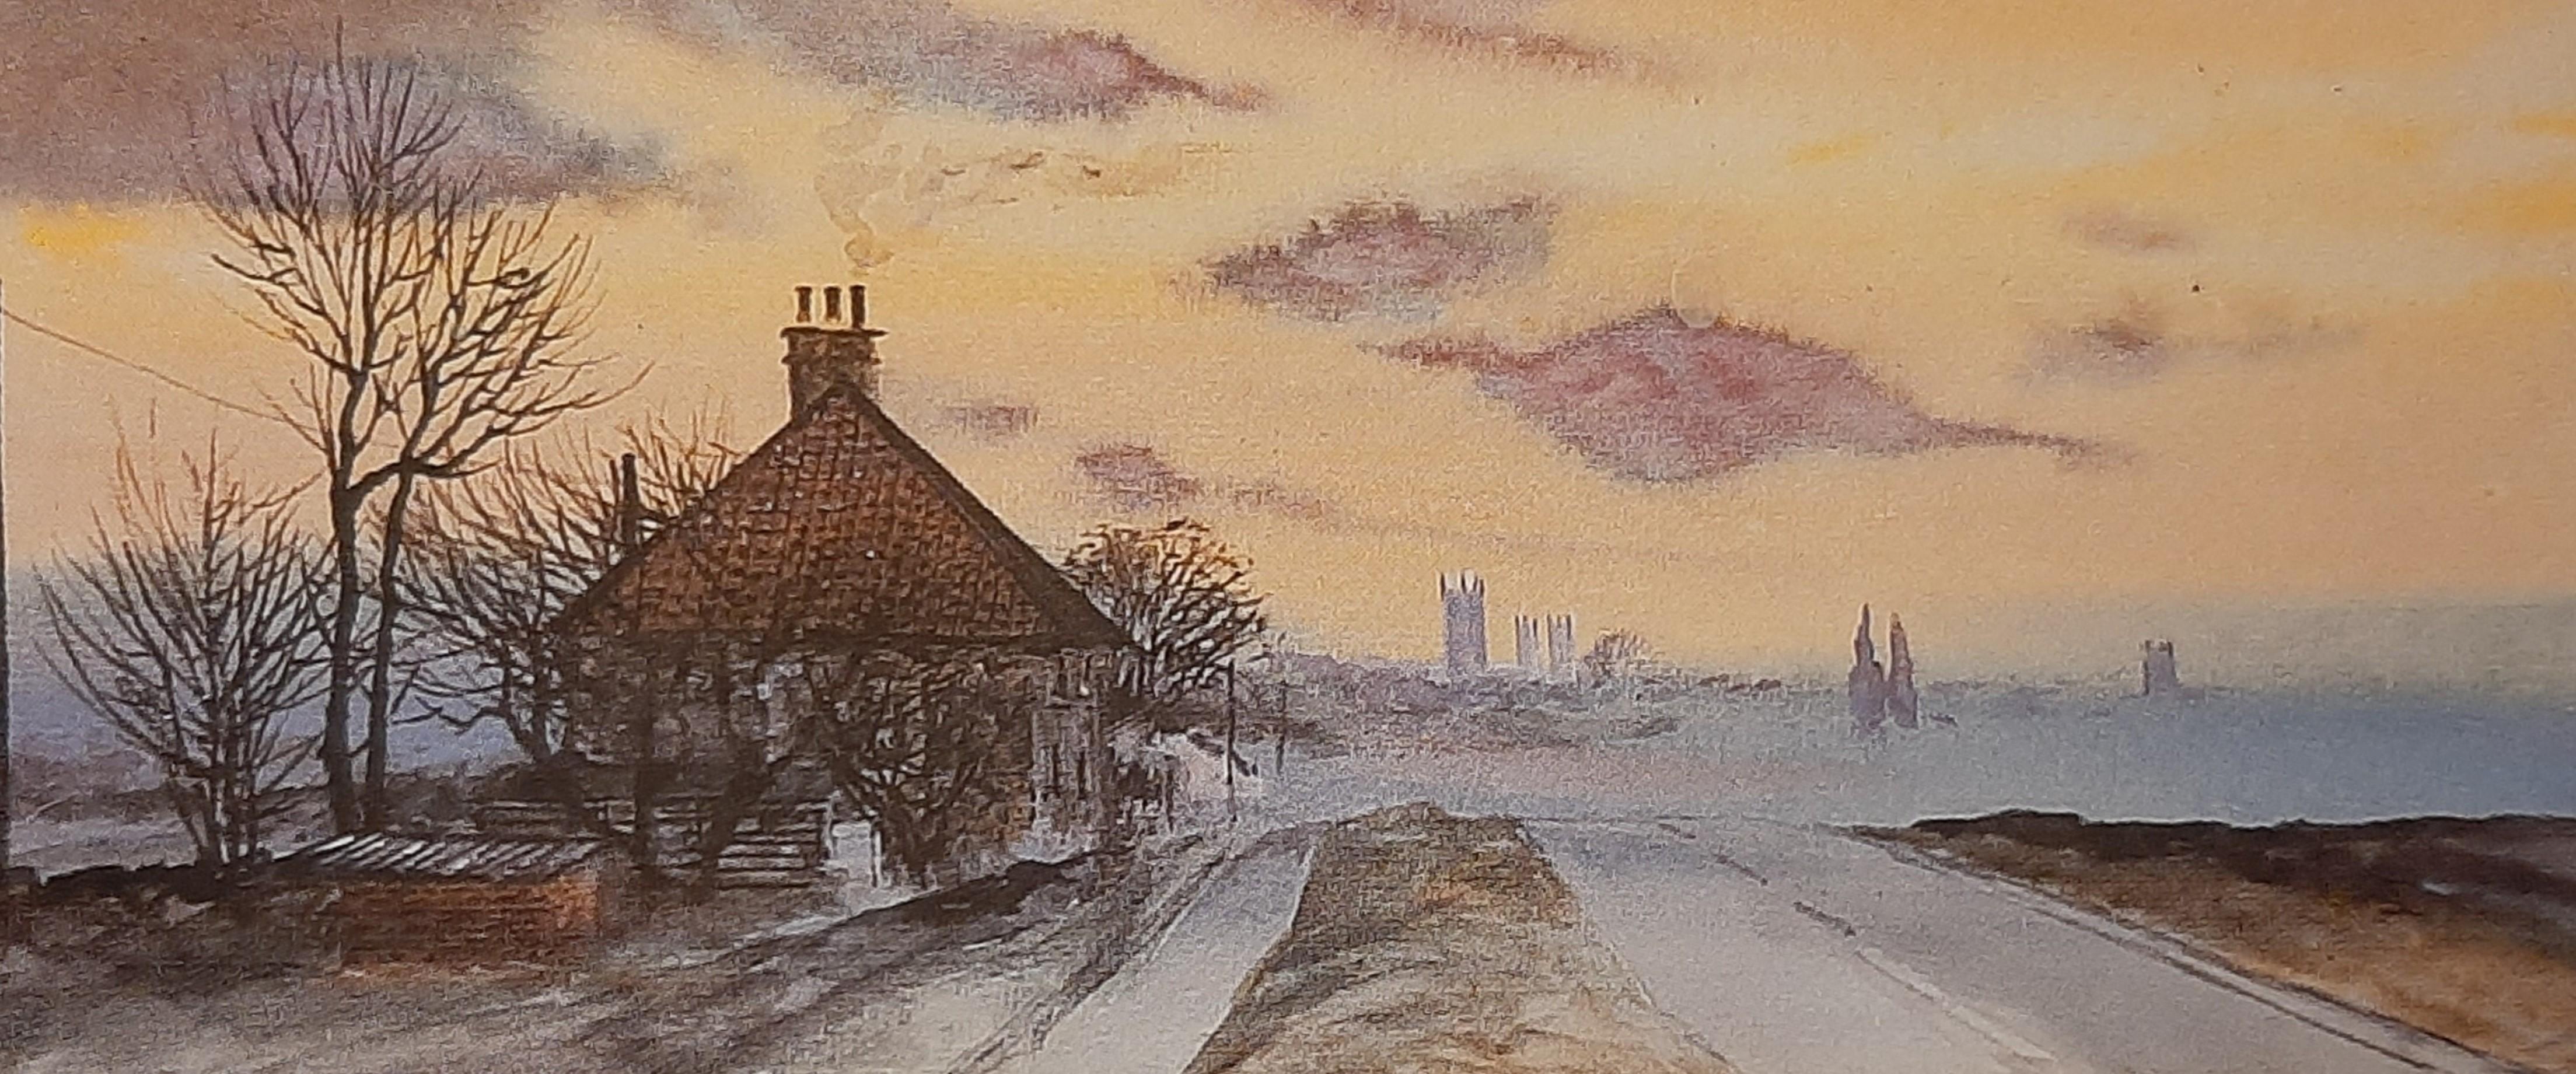 Cropped image of a painting by David Cuppleditch